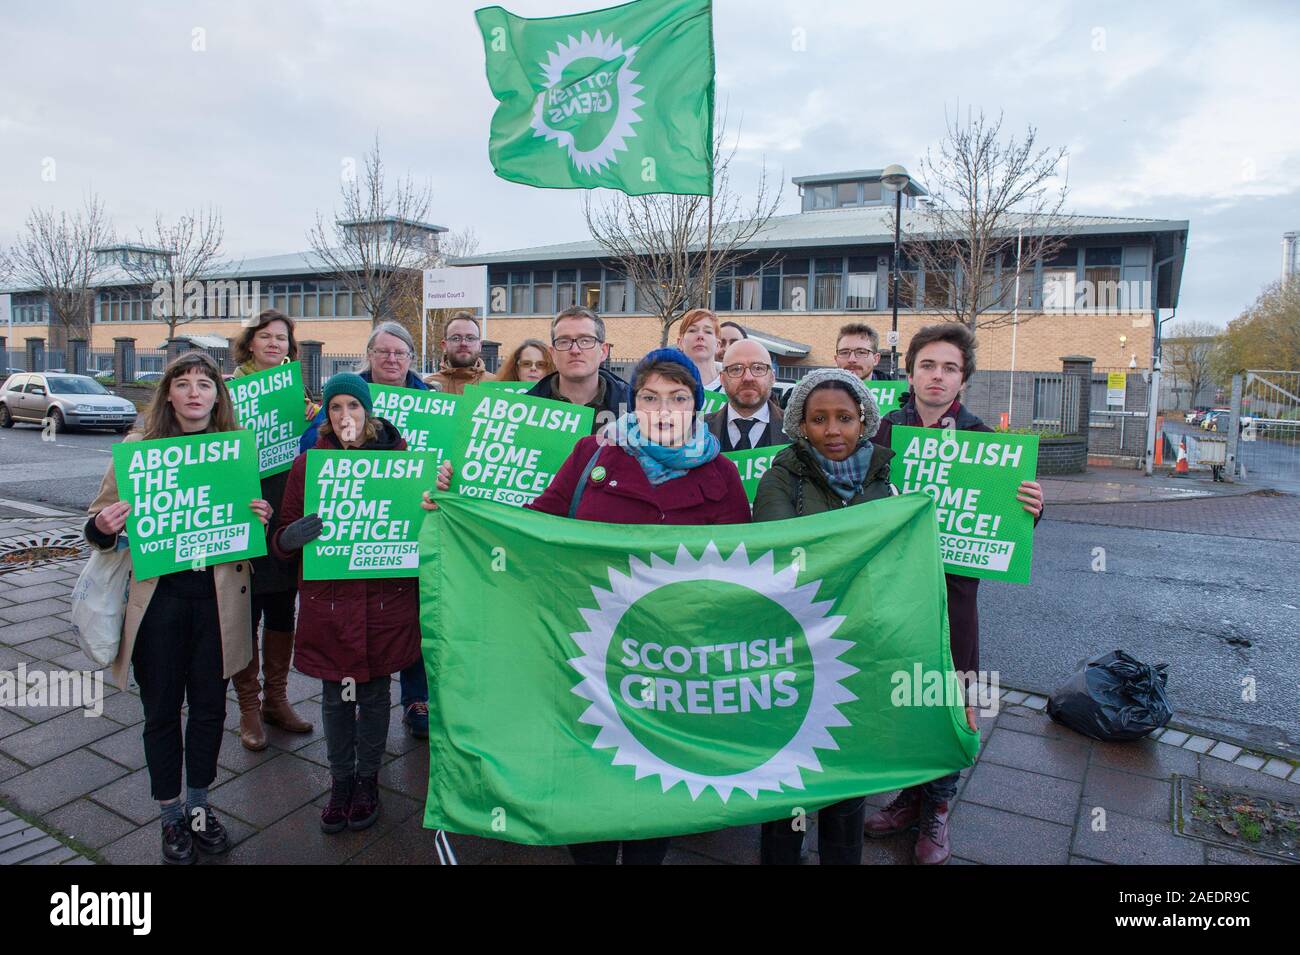 Glasgow, UK. 22 November 2019. Pictured: (front row left) Cllr Kim Long and (front row right) Mandia Kanyange - who has gone through the asylum process, stands together with Patrick Harvie MSP - Co Leader of the Scottish Green Party campaigns with local candidates, councillors and party members for the abolition of the home office.  Credit: Colin Fisher/Alamy Live News. Stock Photo